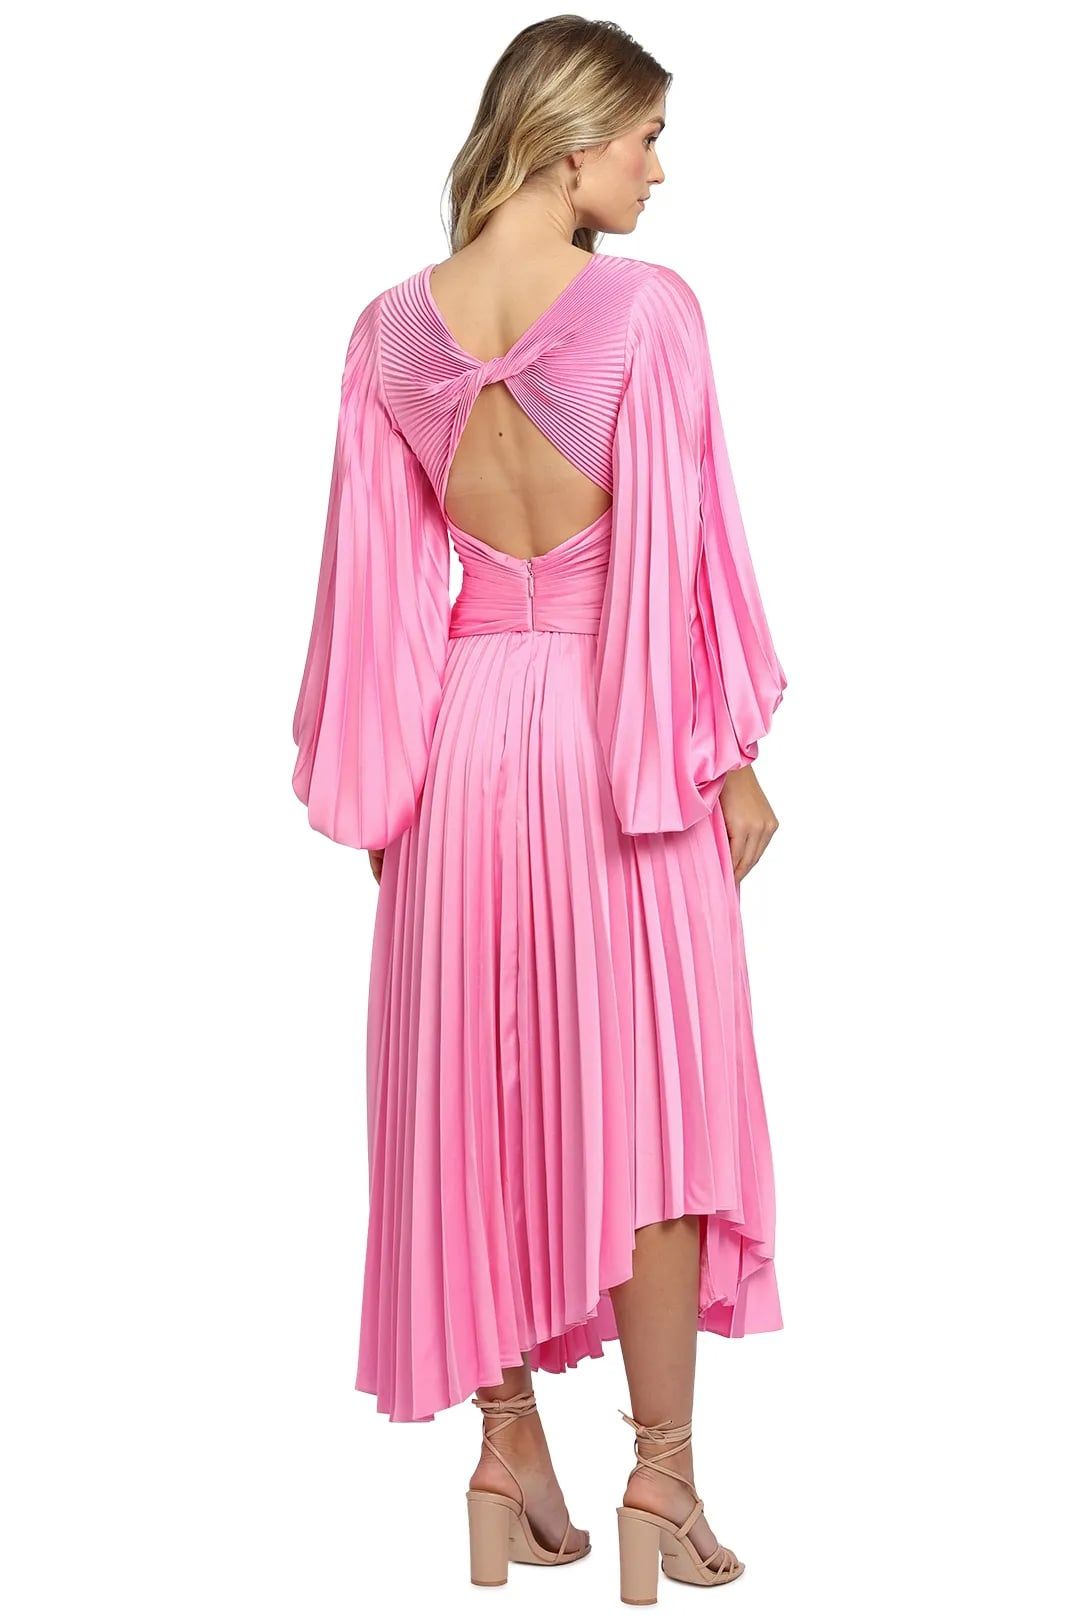 Palms dress in pink for formal events.